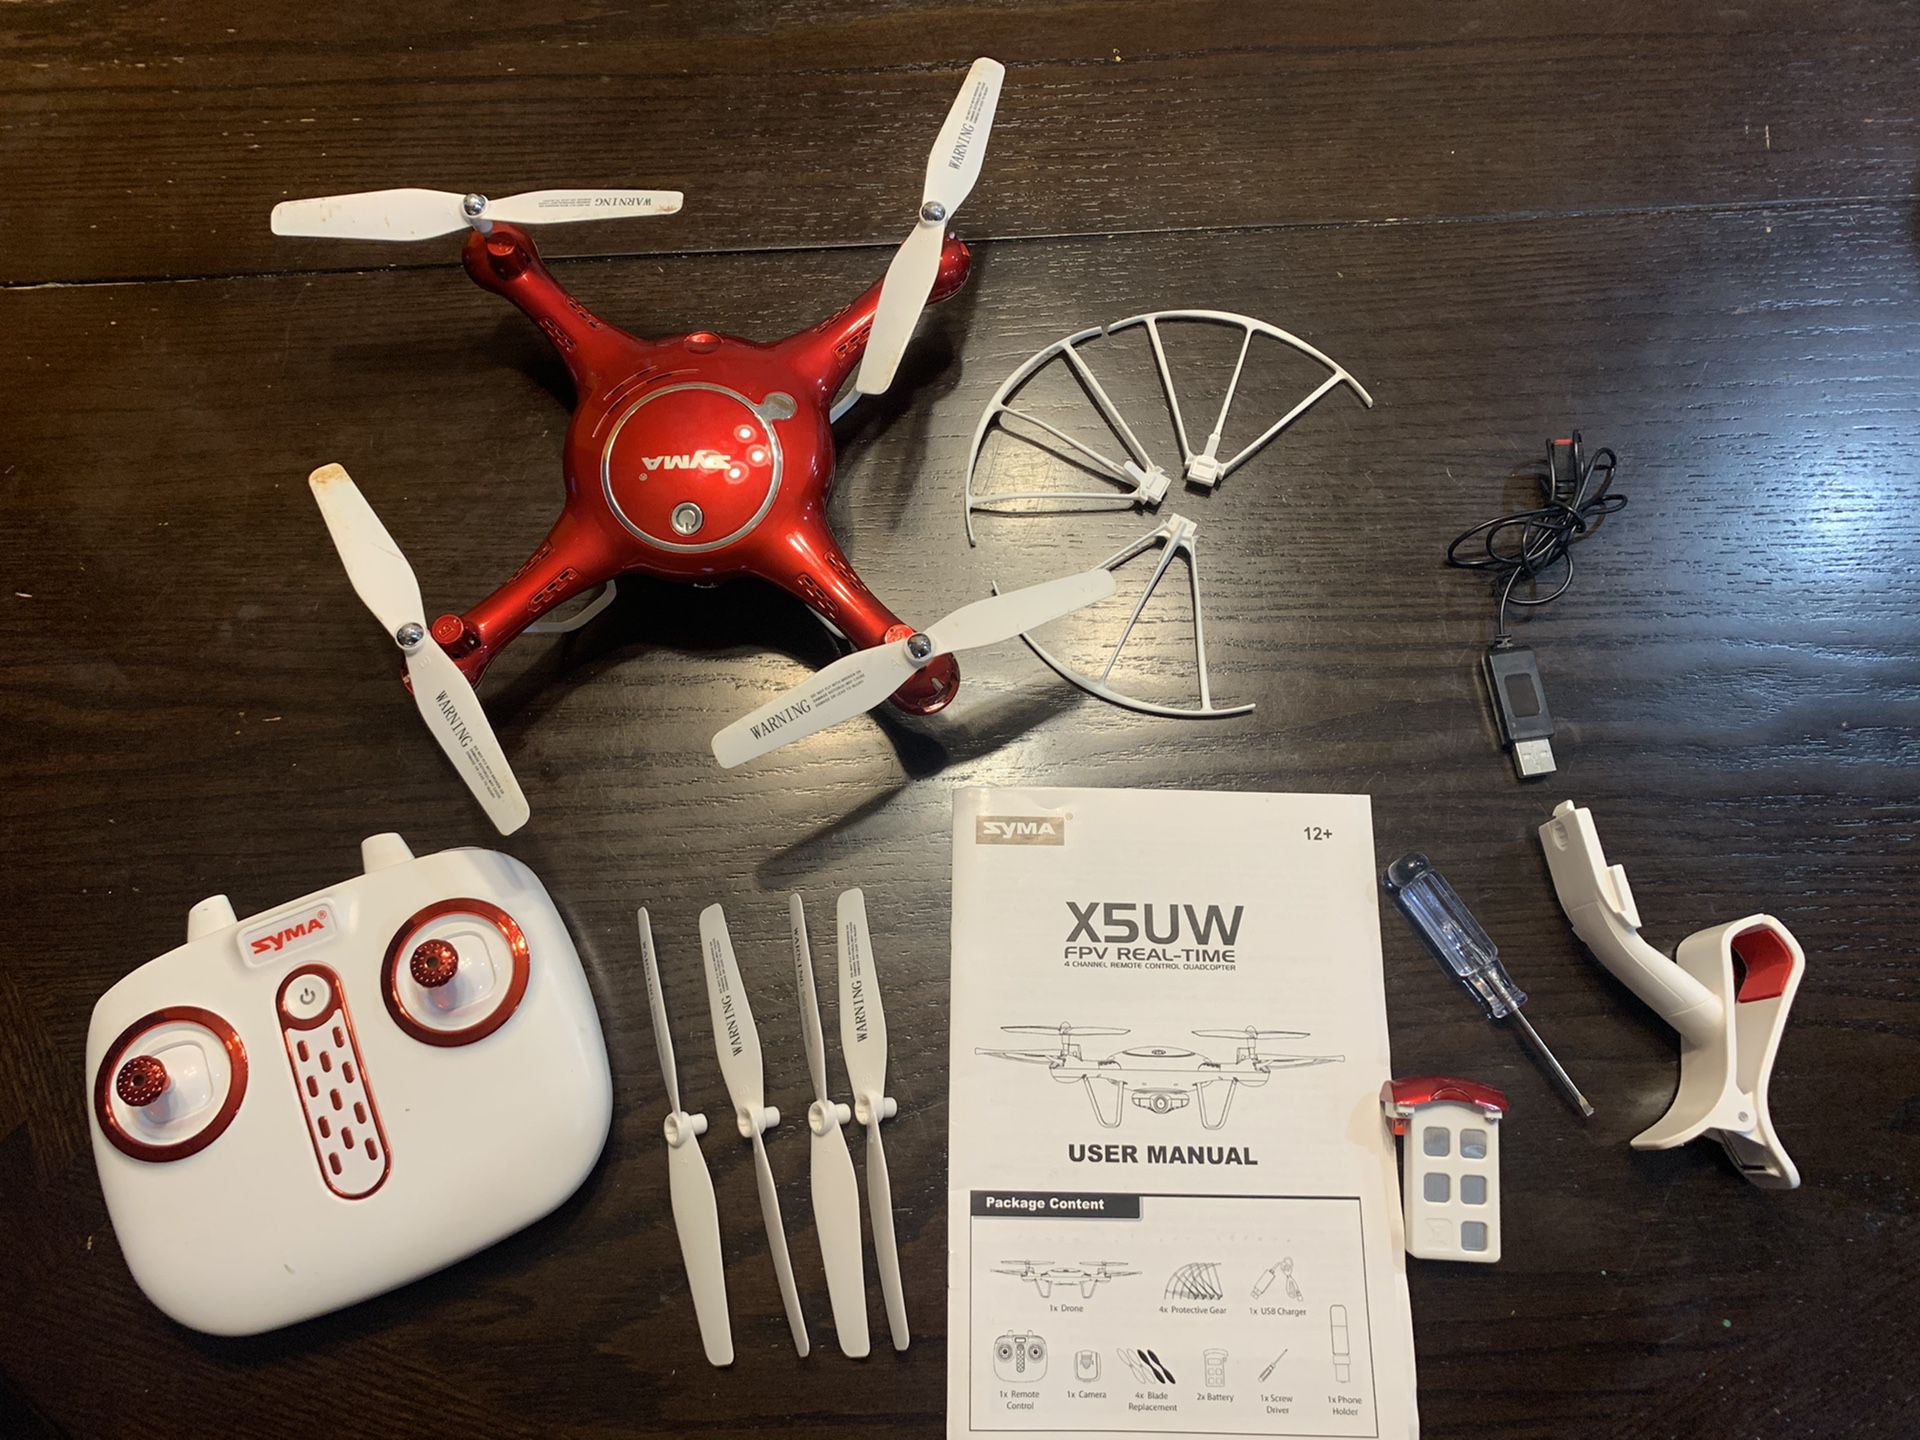 Syma X5UW Wifi FPV 2.4Ghz RC Drone Quadcopter with 720P HD Camera, Flight Plan Route App Control and Altitude Hold Function - Red